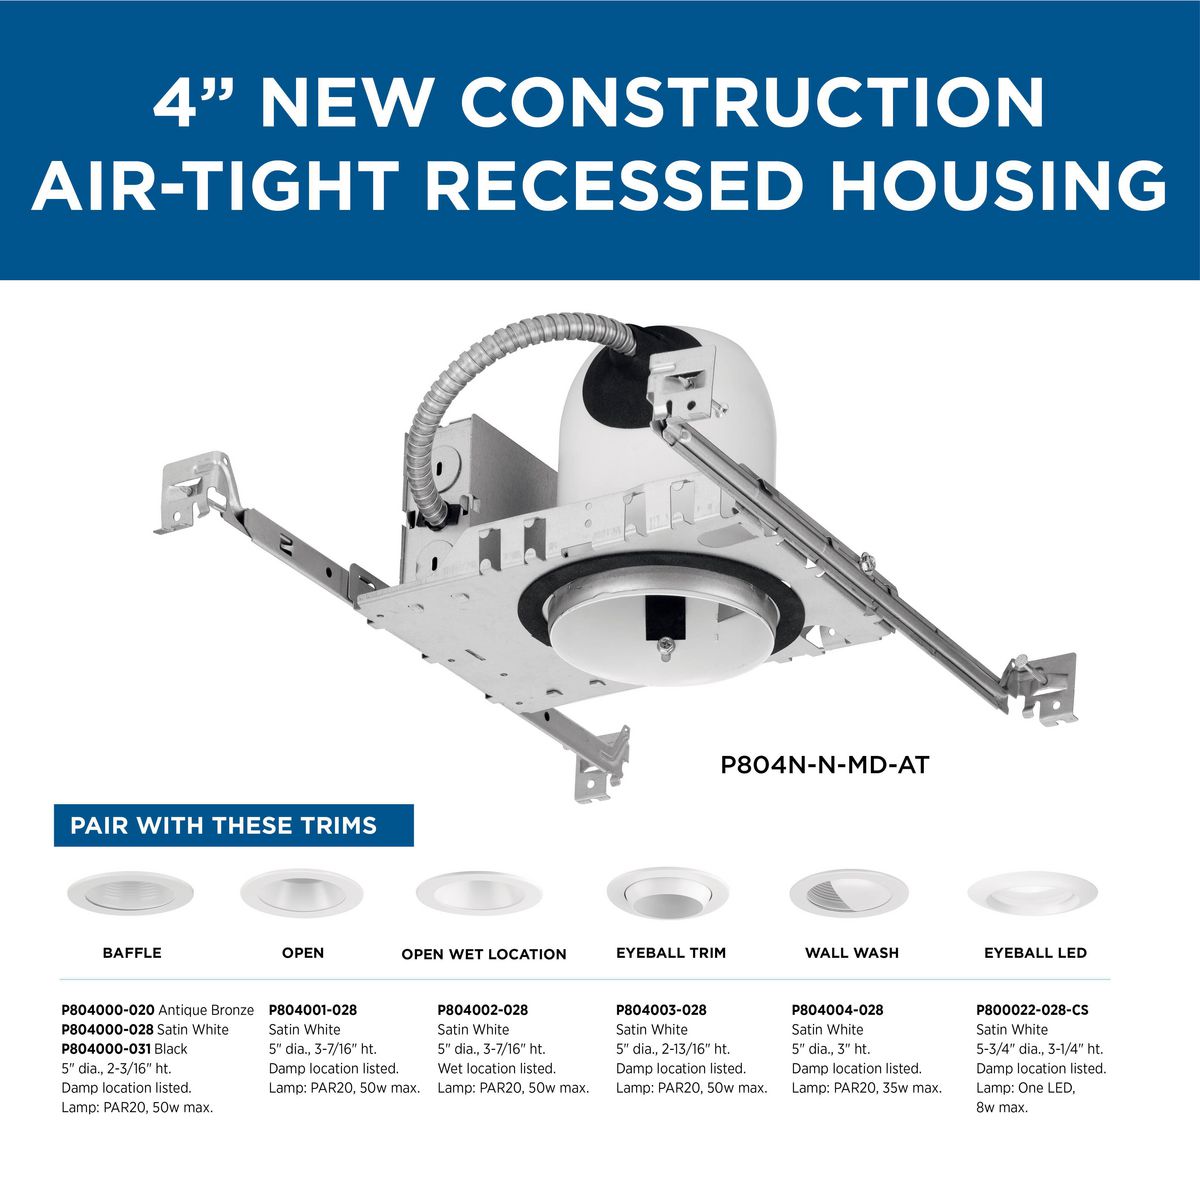 4" Recessed New Air-Tight Housing